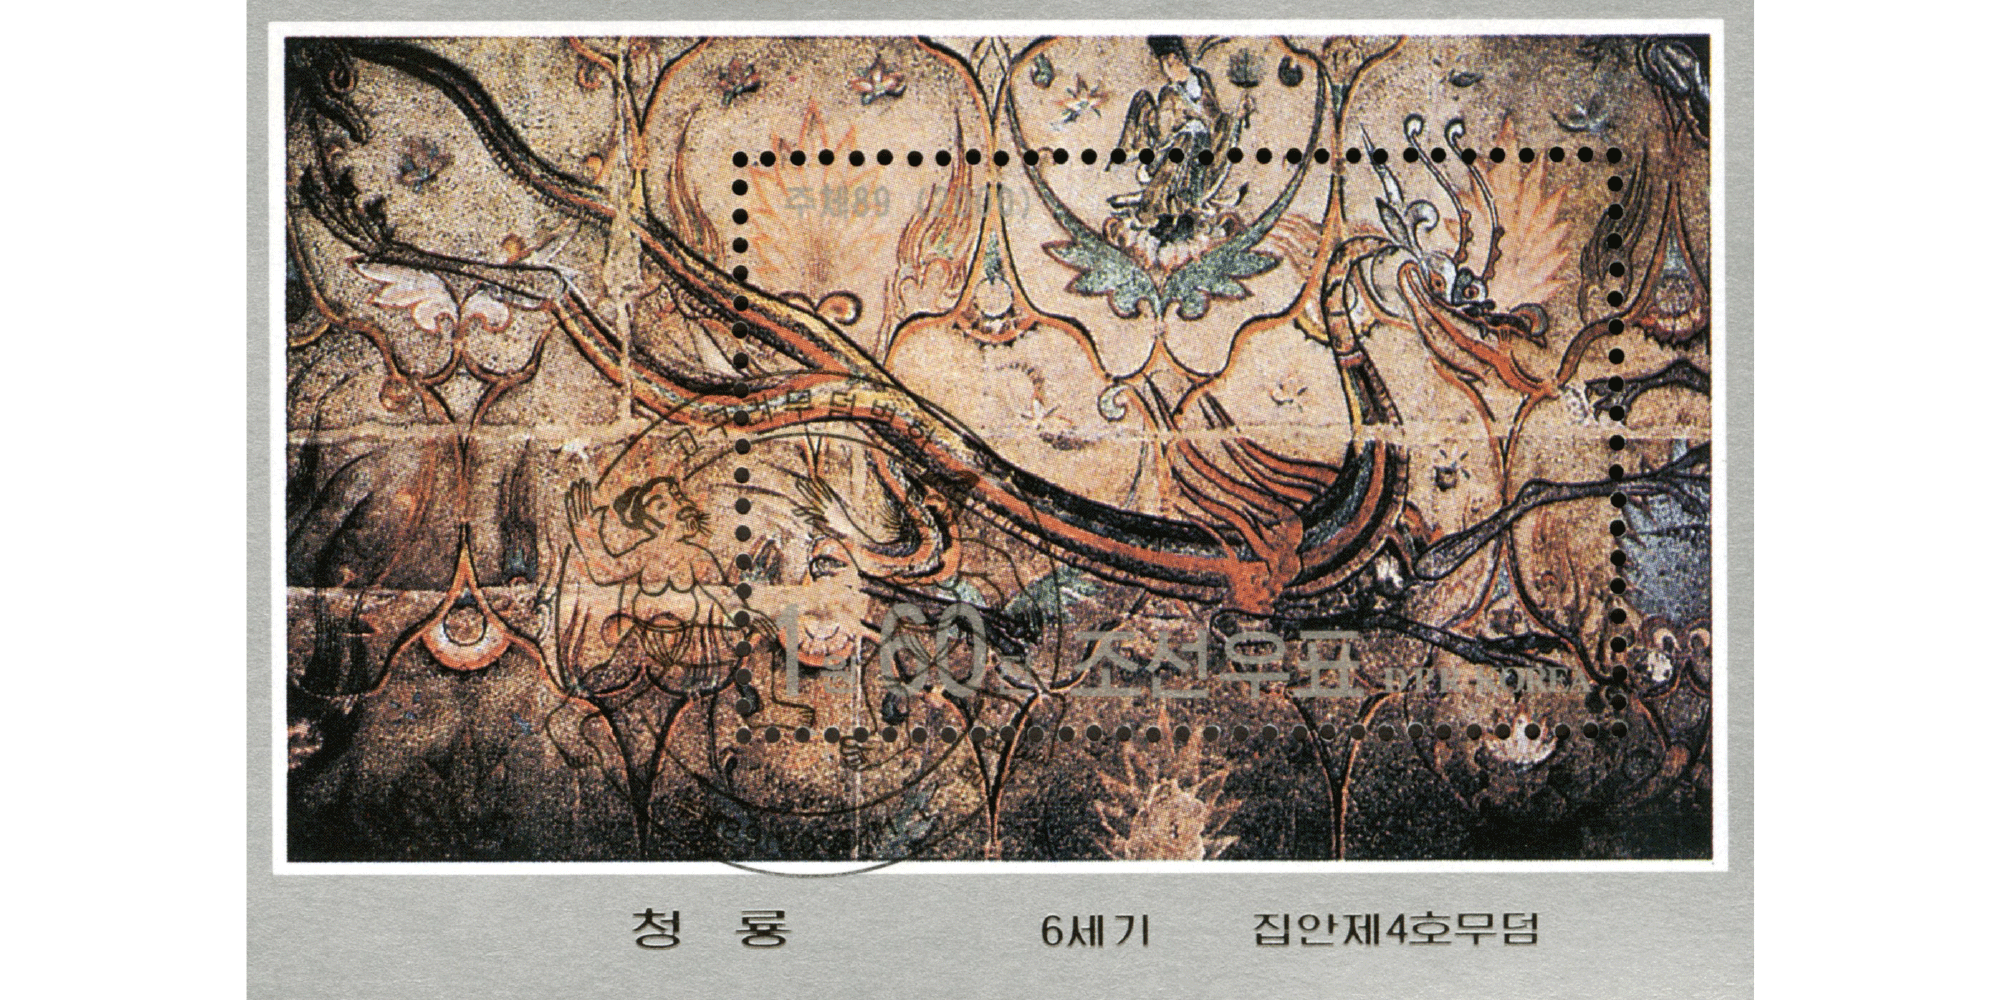 North Korean postage stamp showing a cave painting of a dragon